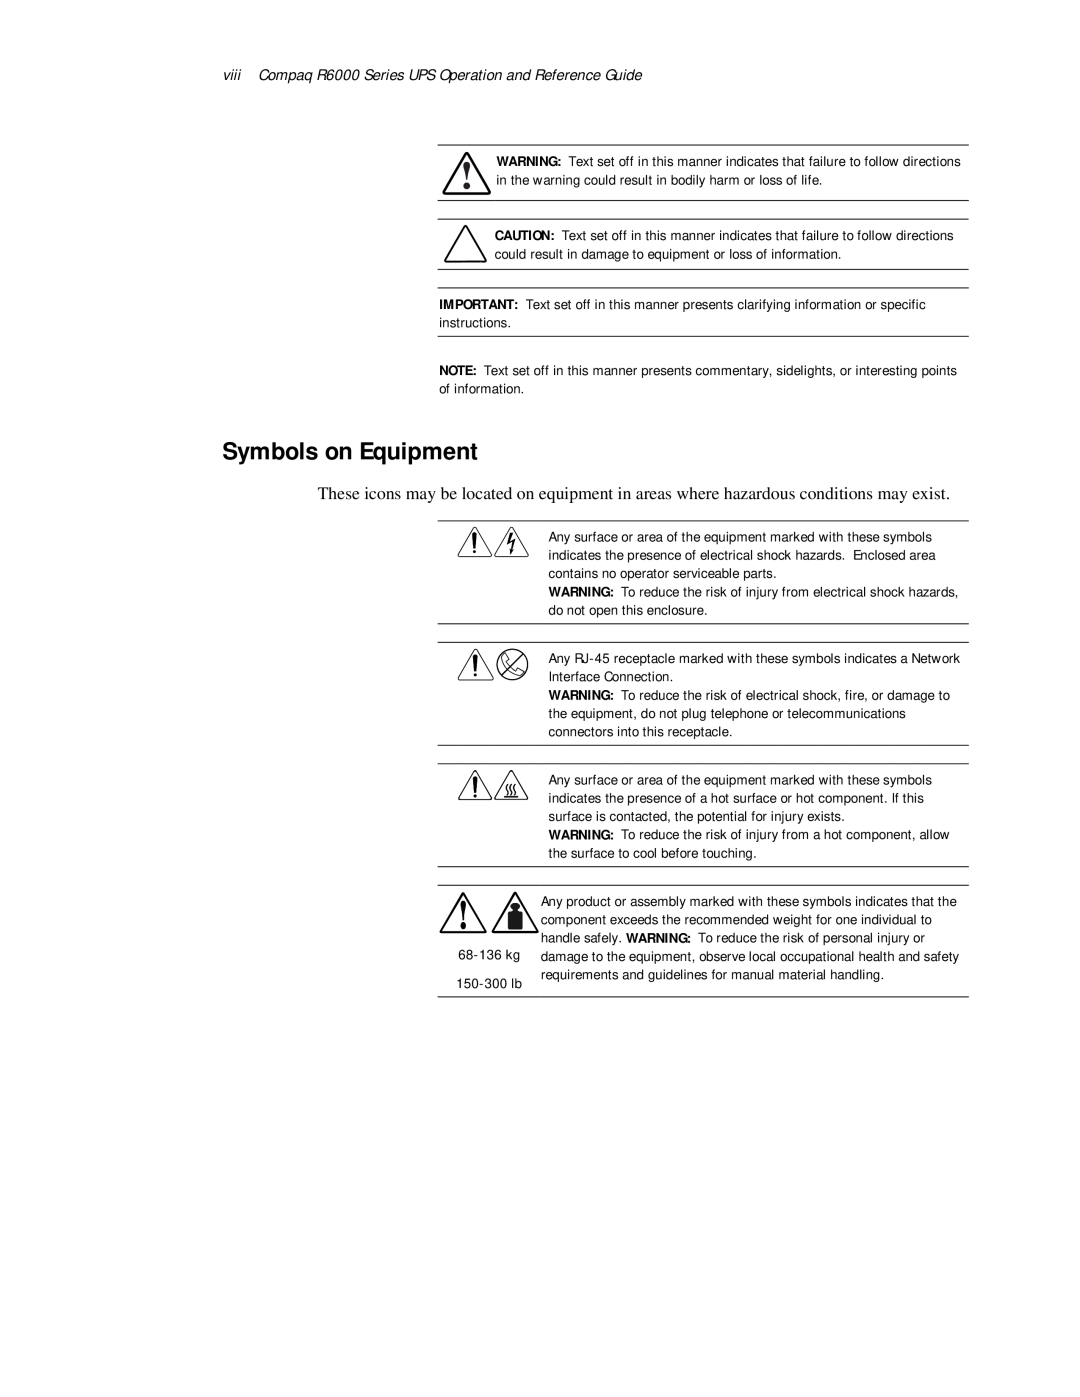 Compaq manual Symbols on Equipment, viii Compaq R6000 Series UPS Operation and Reference Guide 